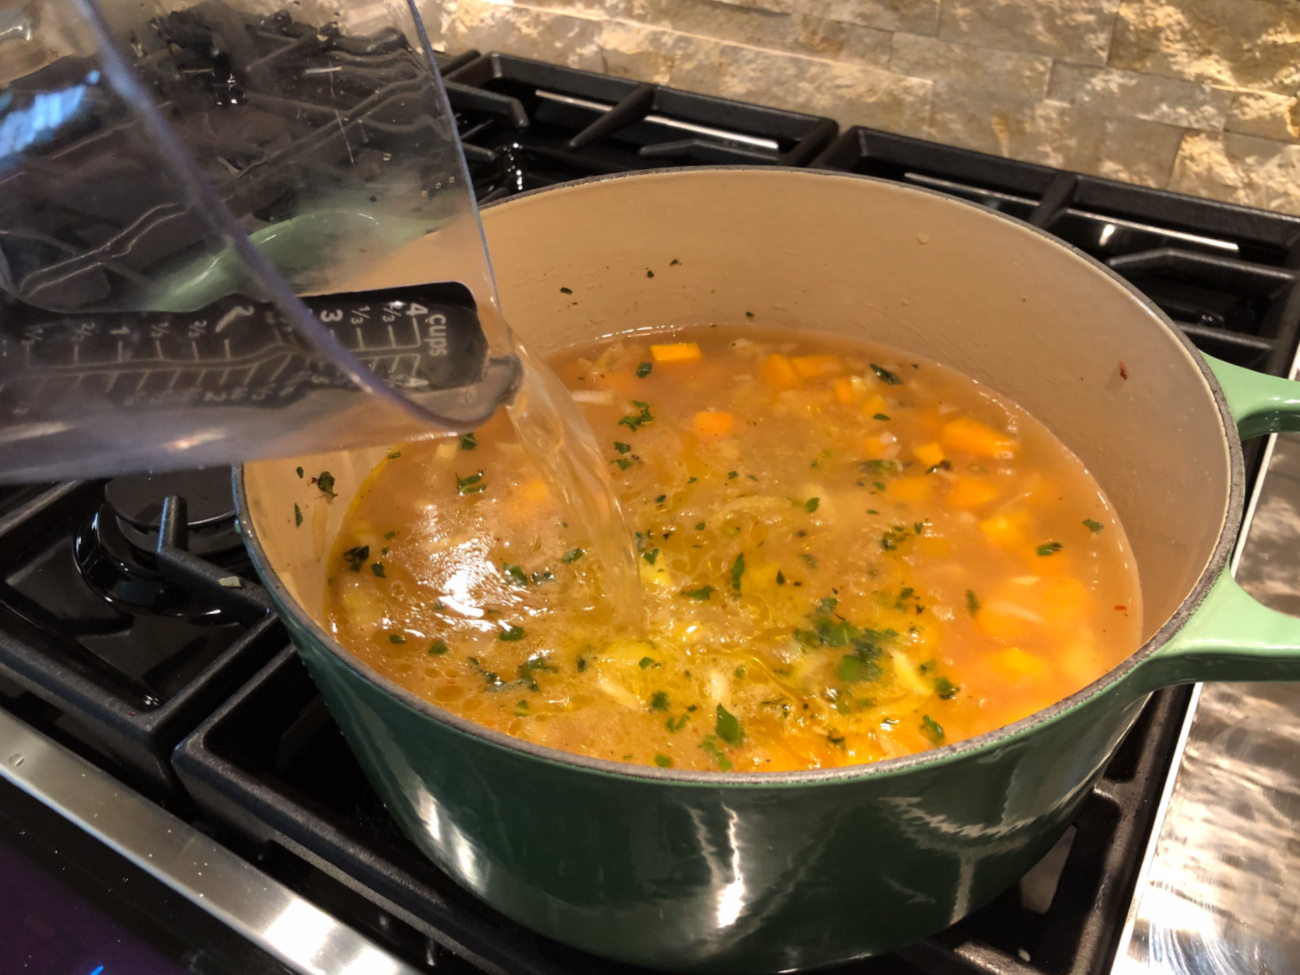 Try This Hearty Butternut Squash Soup For A Tasty Meal In A Flash on I Heart Publix 3